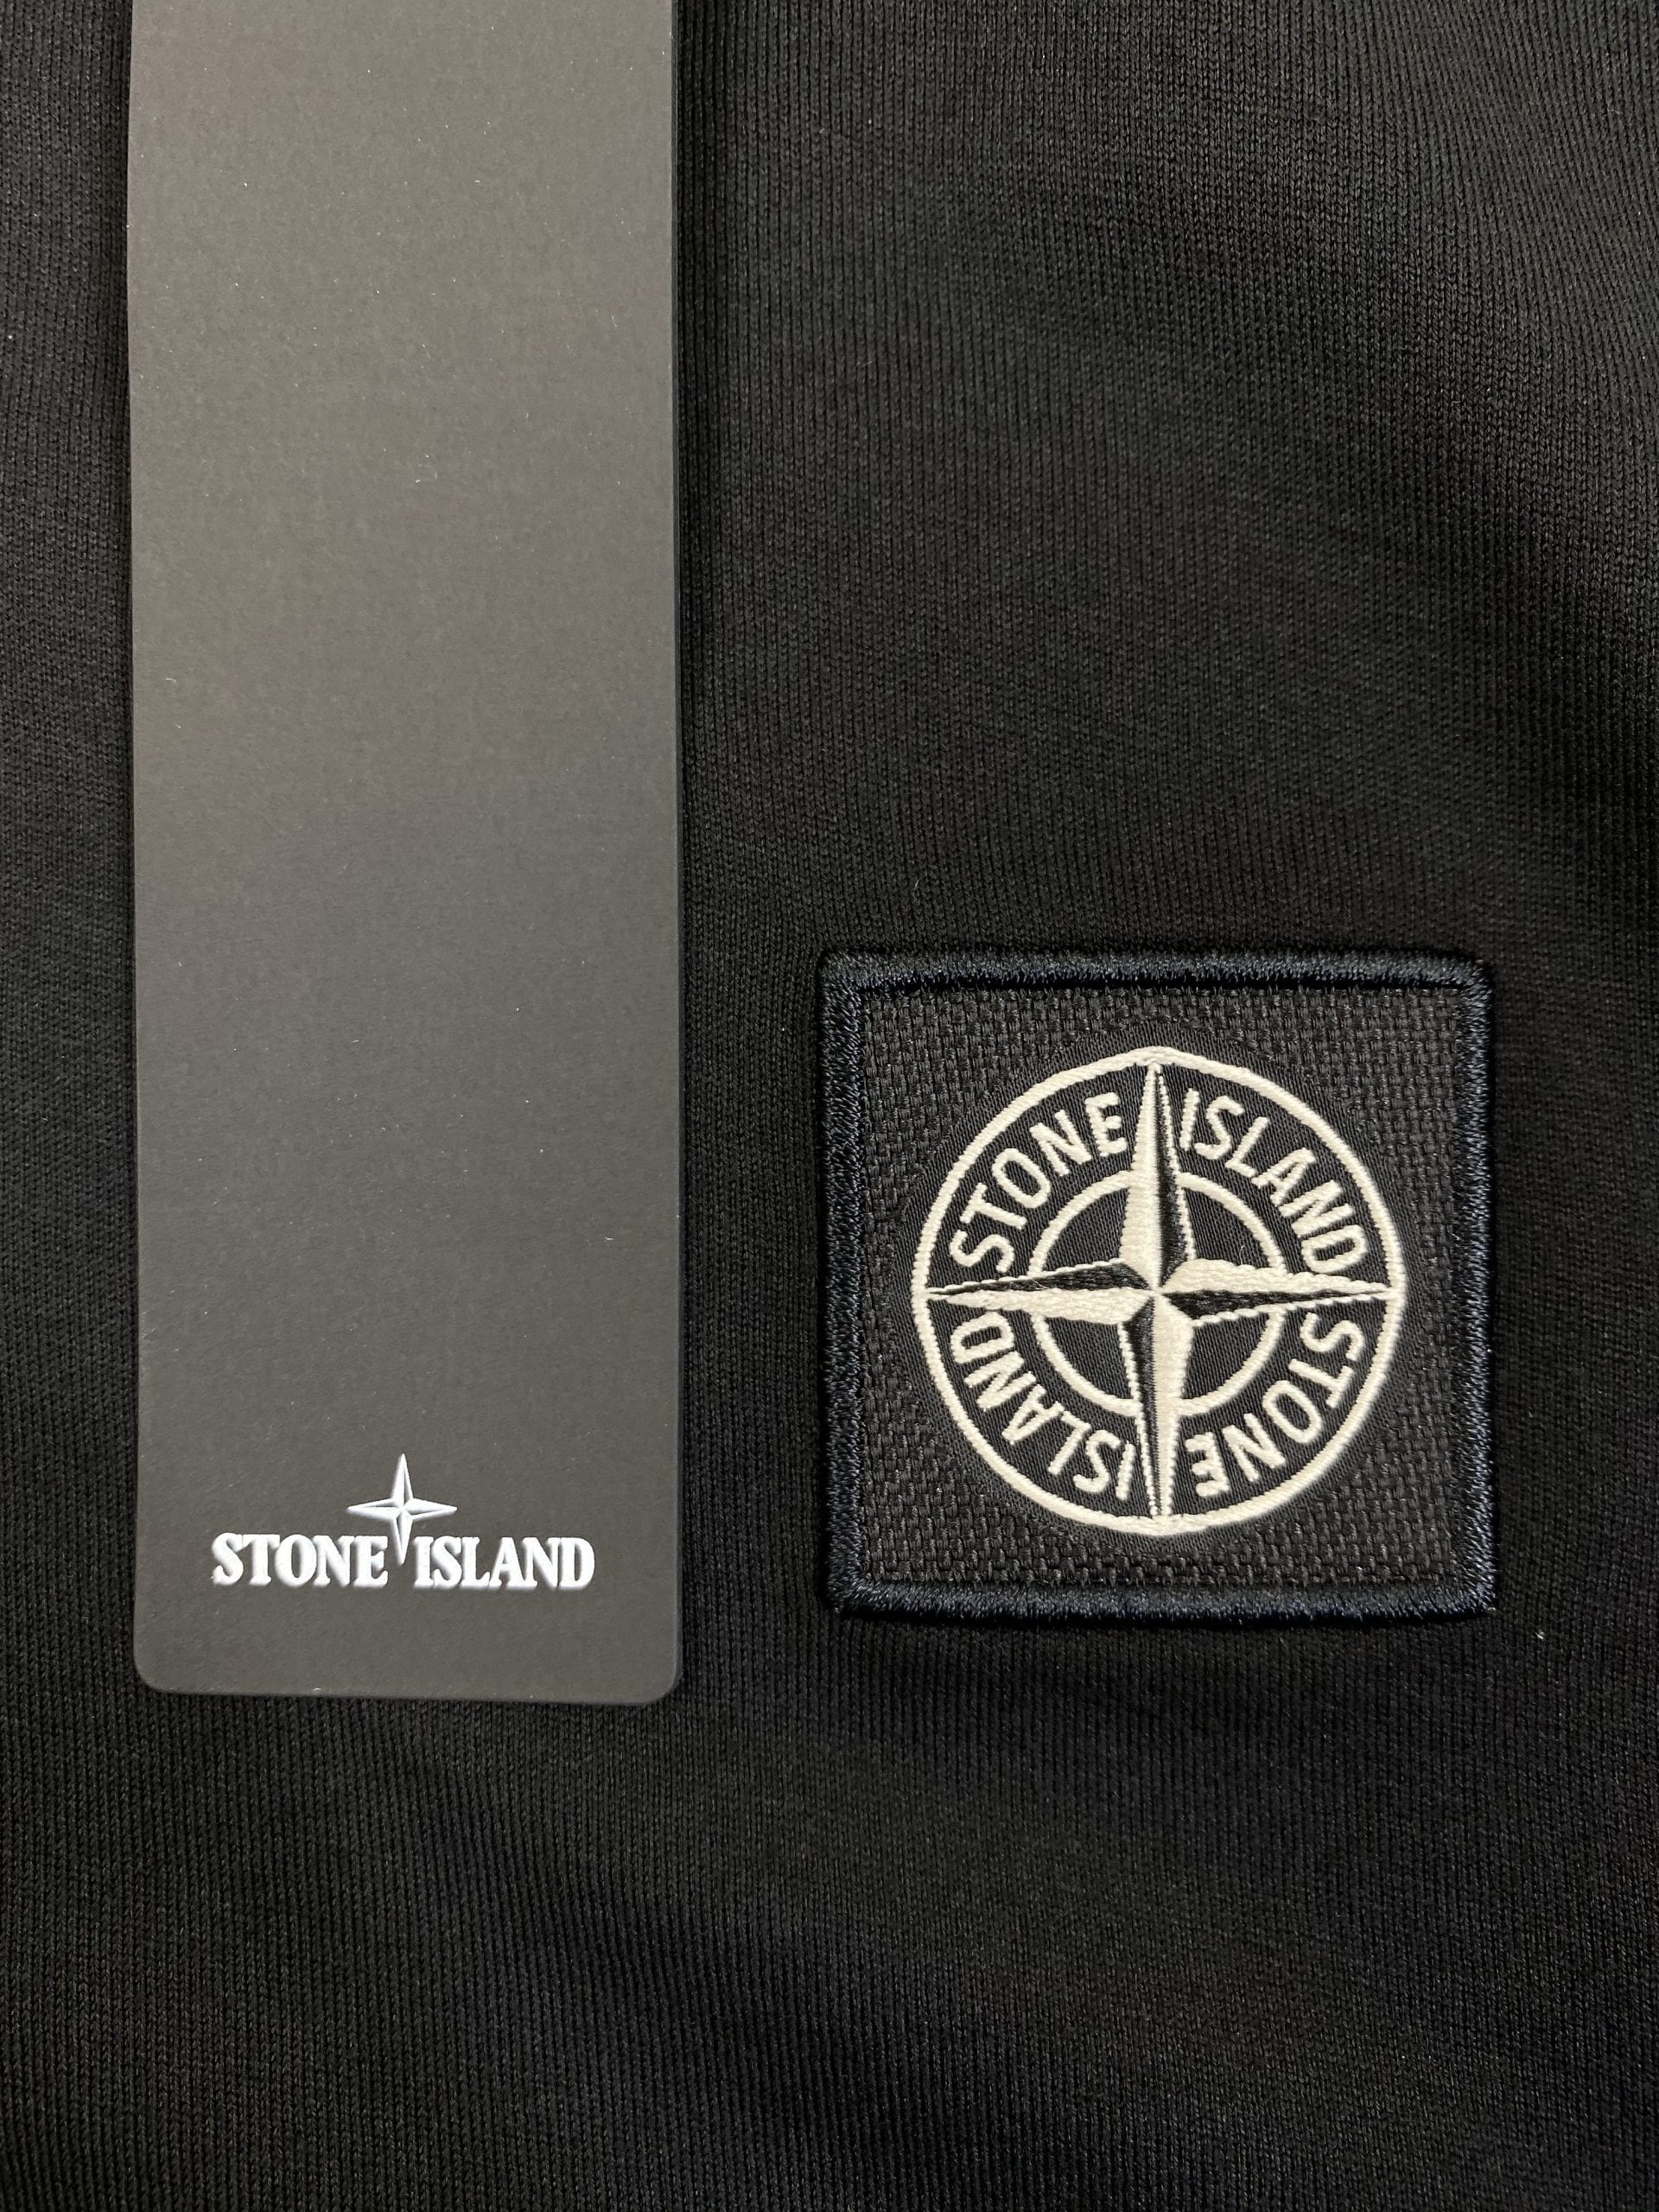 Stone Island Small Compass Badge T-Shirt Black - Esquire Clothing